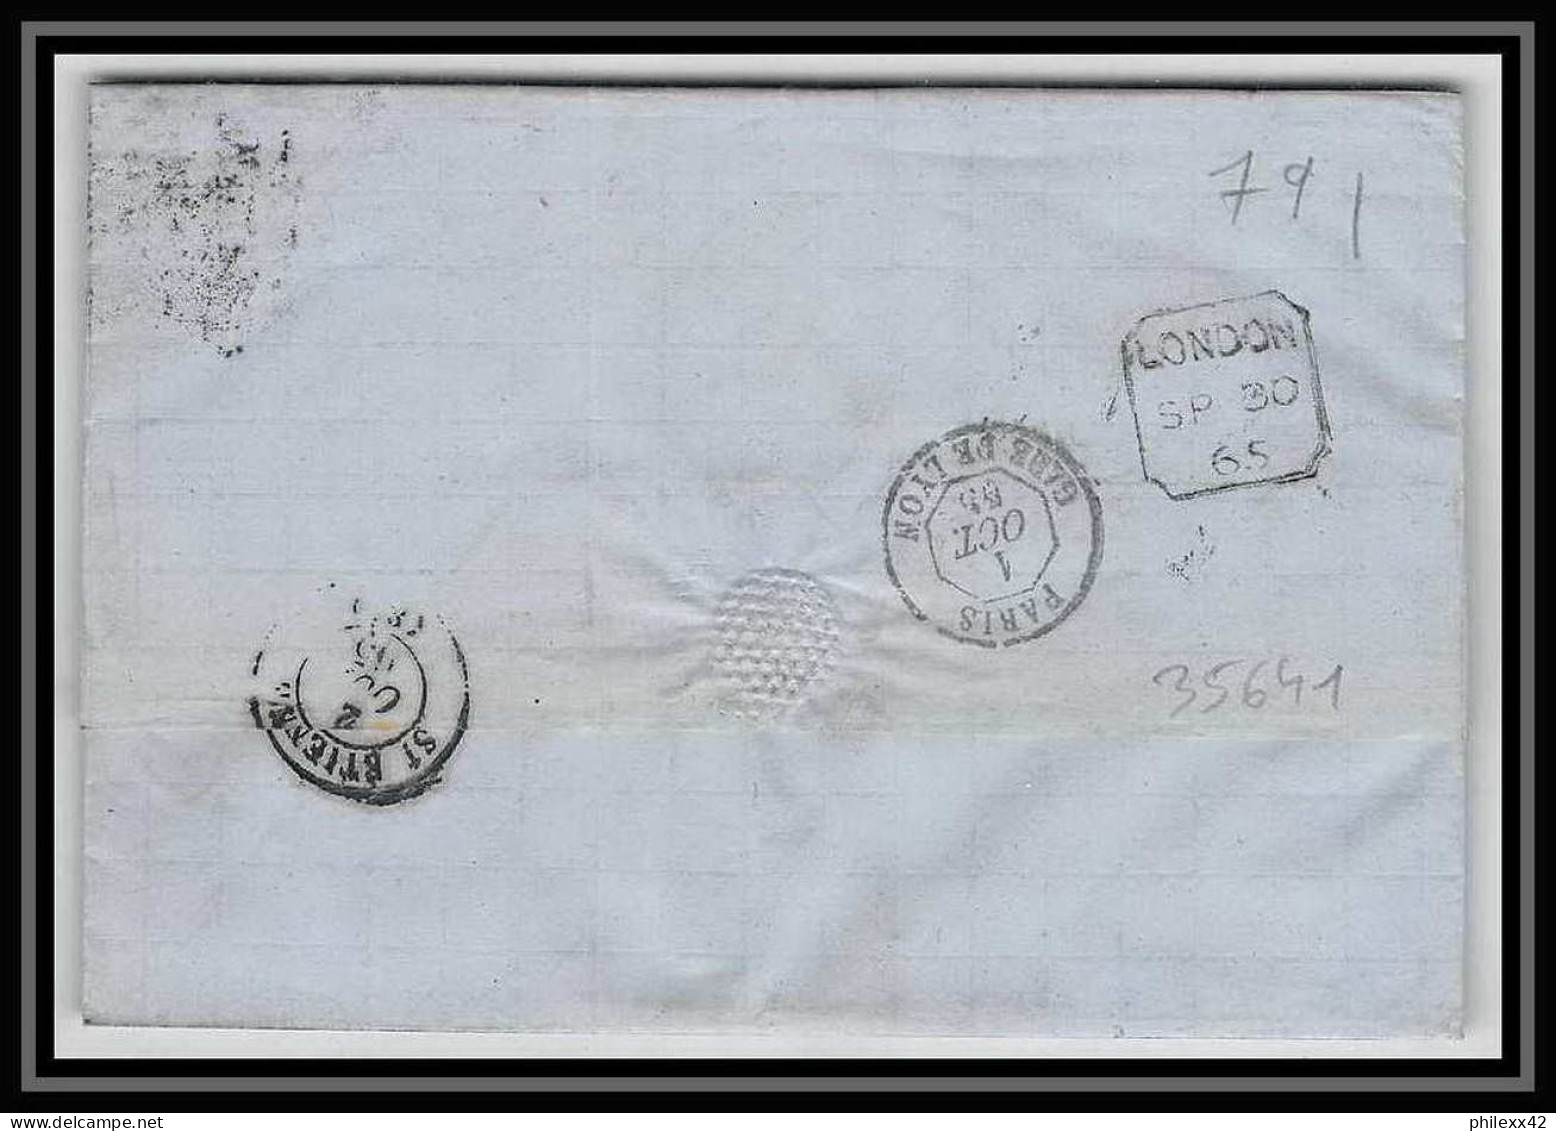 35641 N°32 Victoria 4p Red London St Etienne France 1865 Cachet 46 Lettre Cover Grande Bretagne England - Covers & Documents